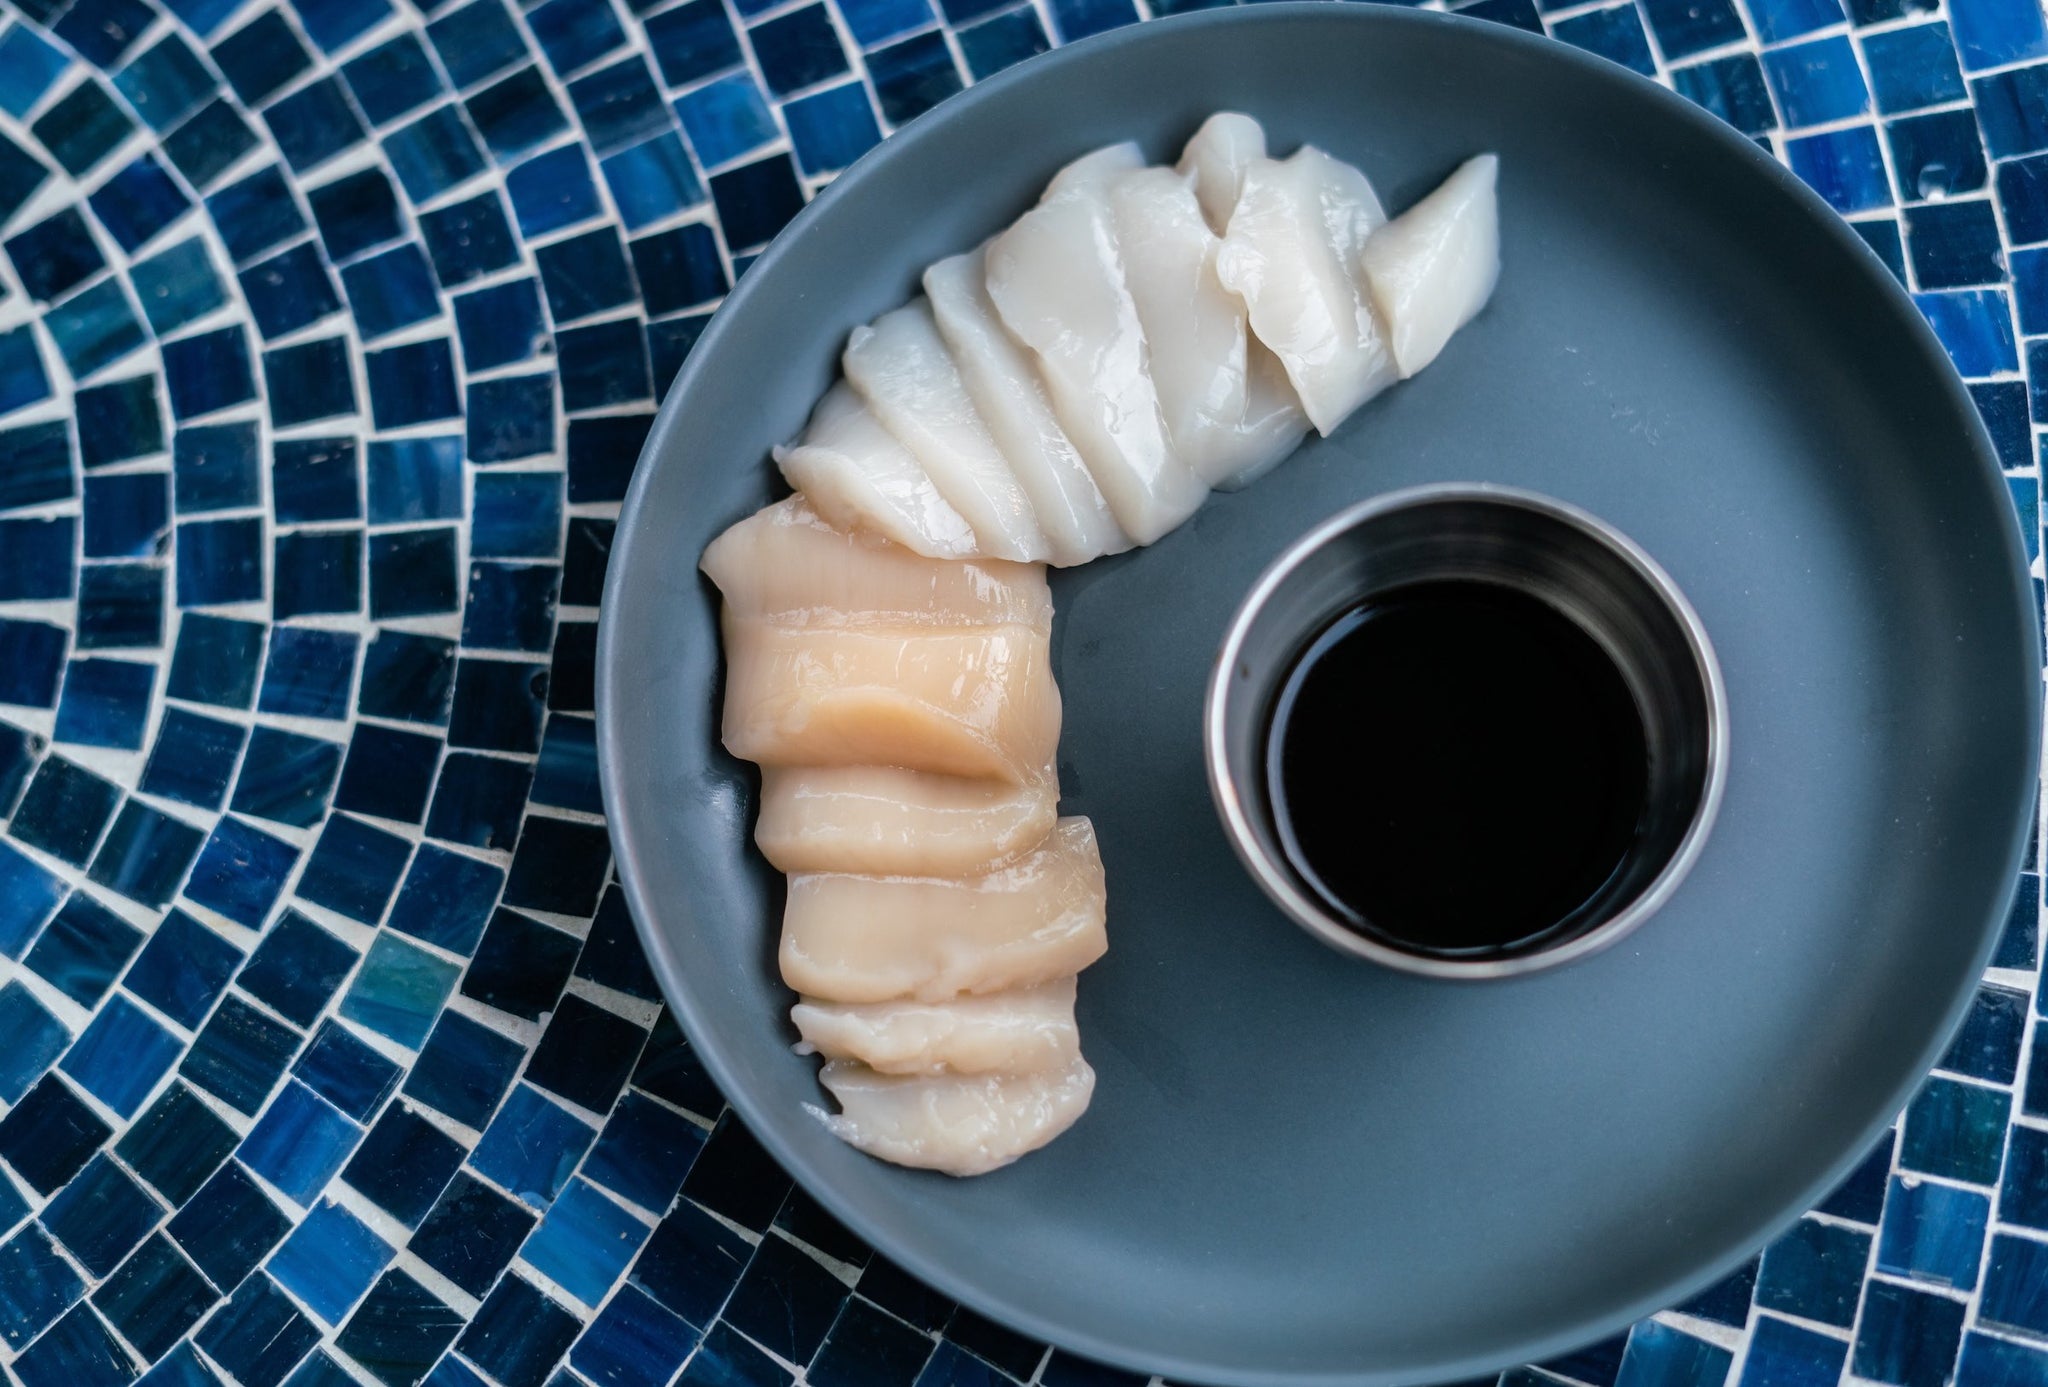 Yes you CAN get luxury sea scallops right here in the U.S.